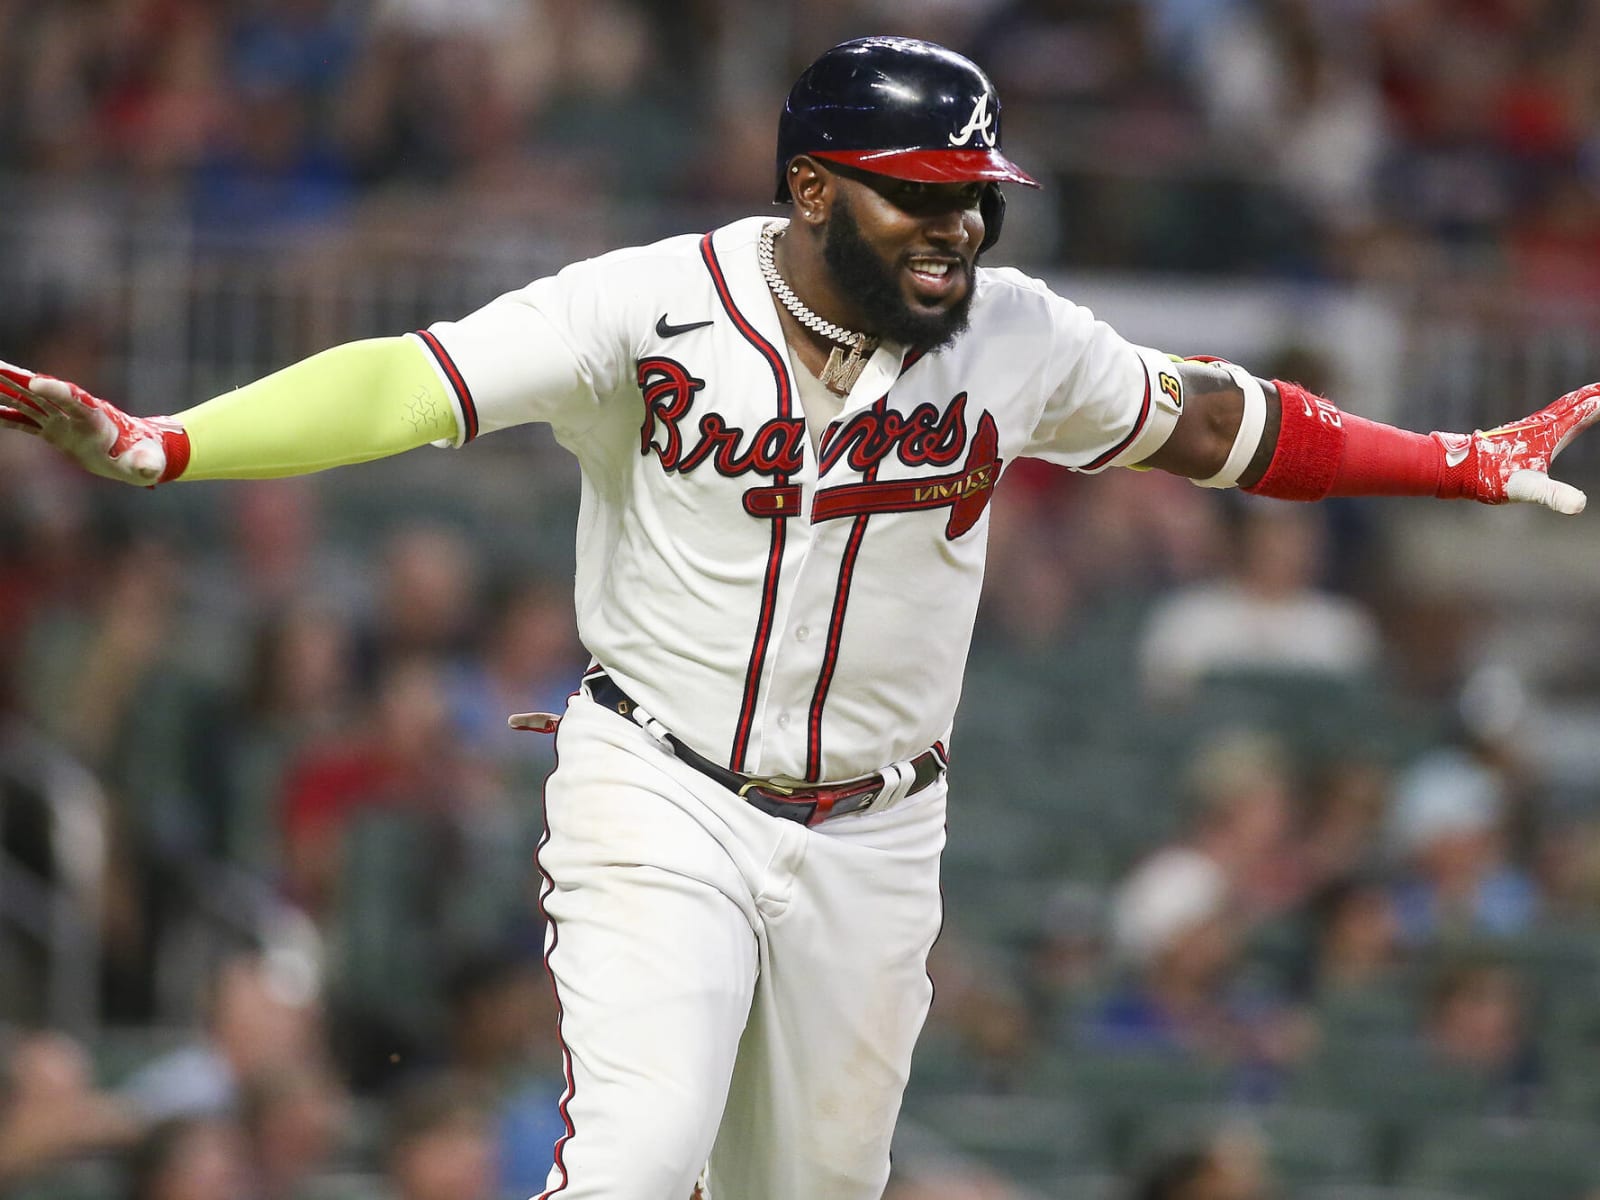 Braves: Marcell Ozuna leads the MLB in a hilarious stat